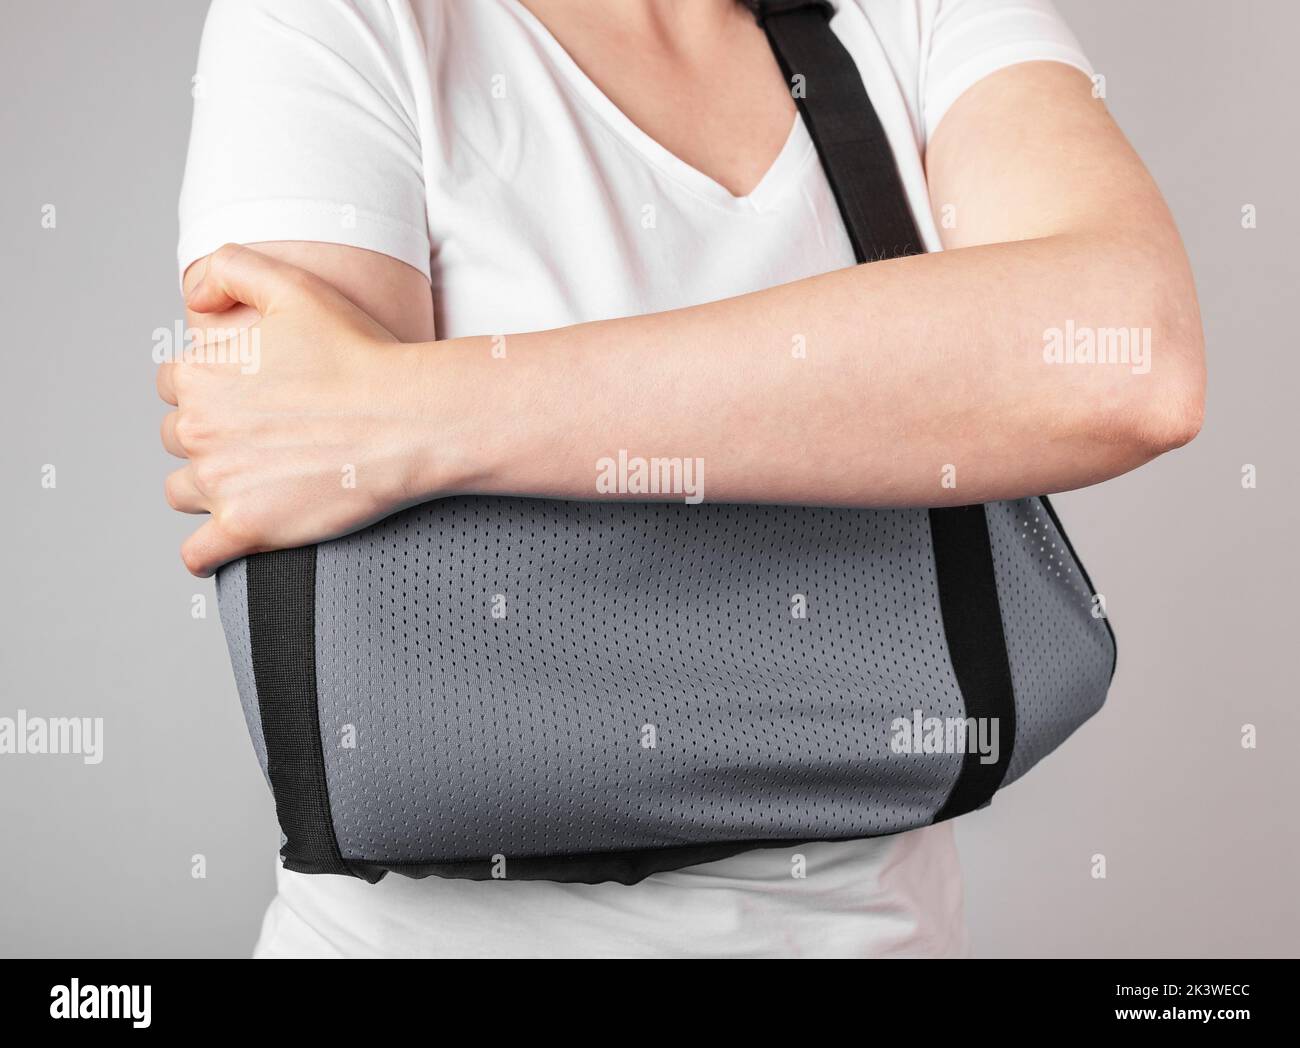 Wearing sling for injured arm, hand, shoulder. High quality photo Stock Photo